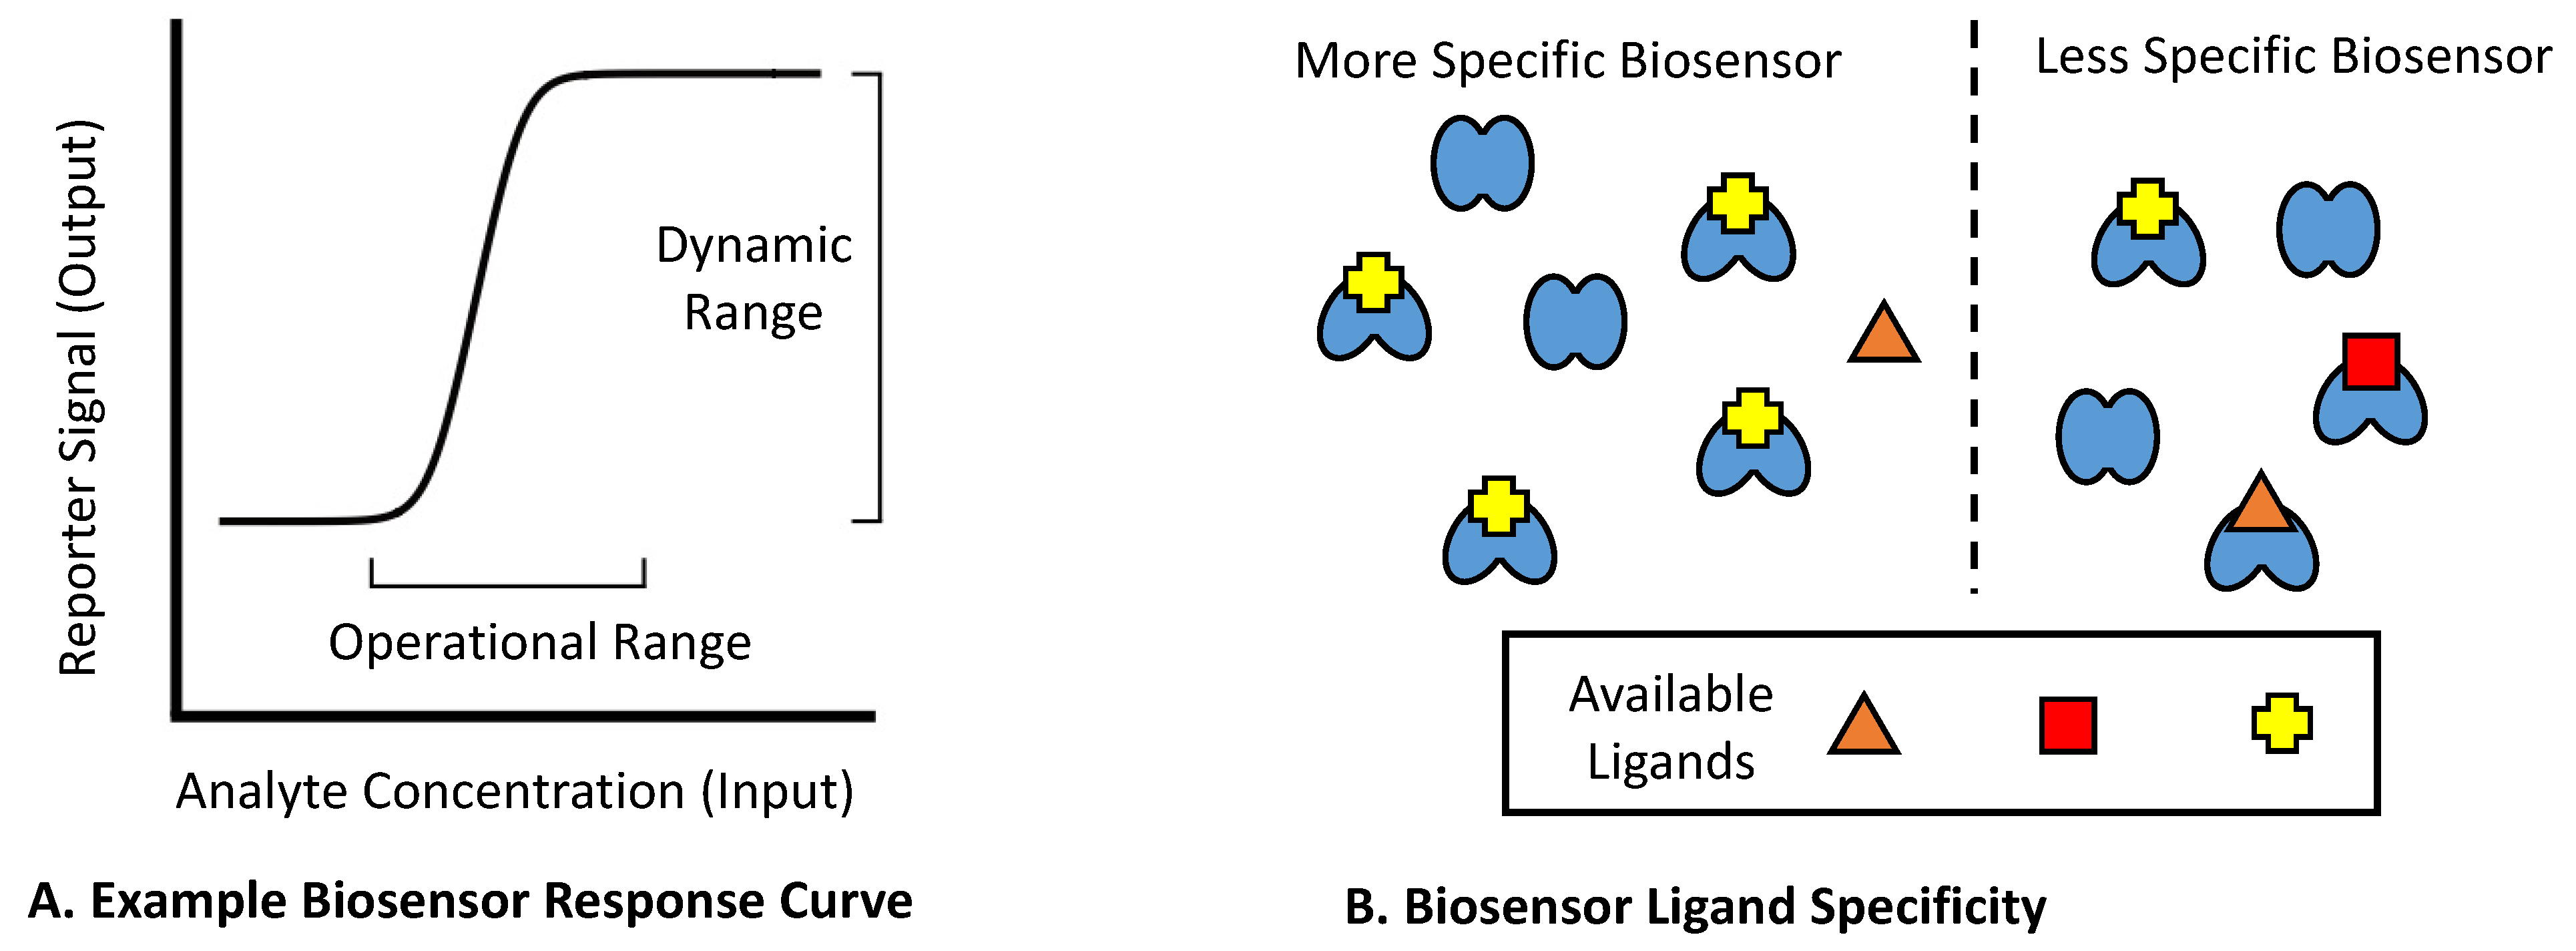 Biosensors | Free Full-Text | Strategies for Improving Small 